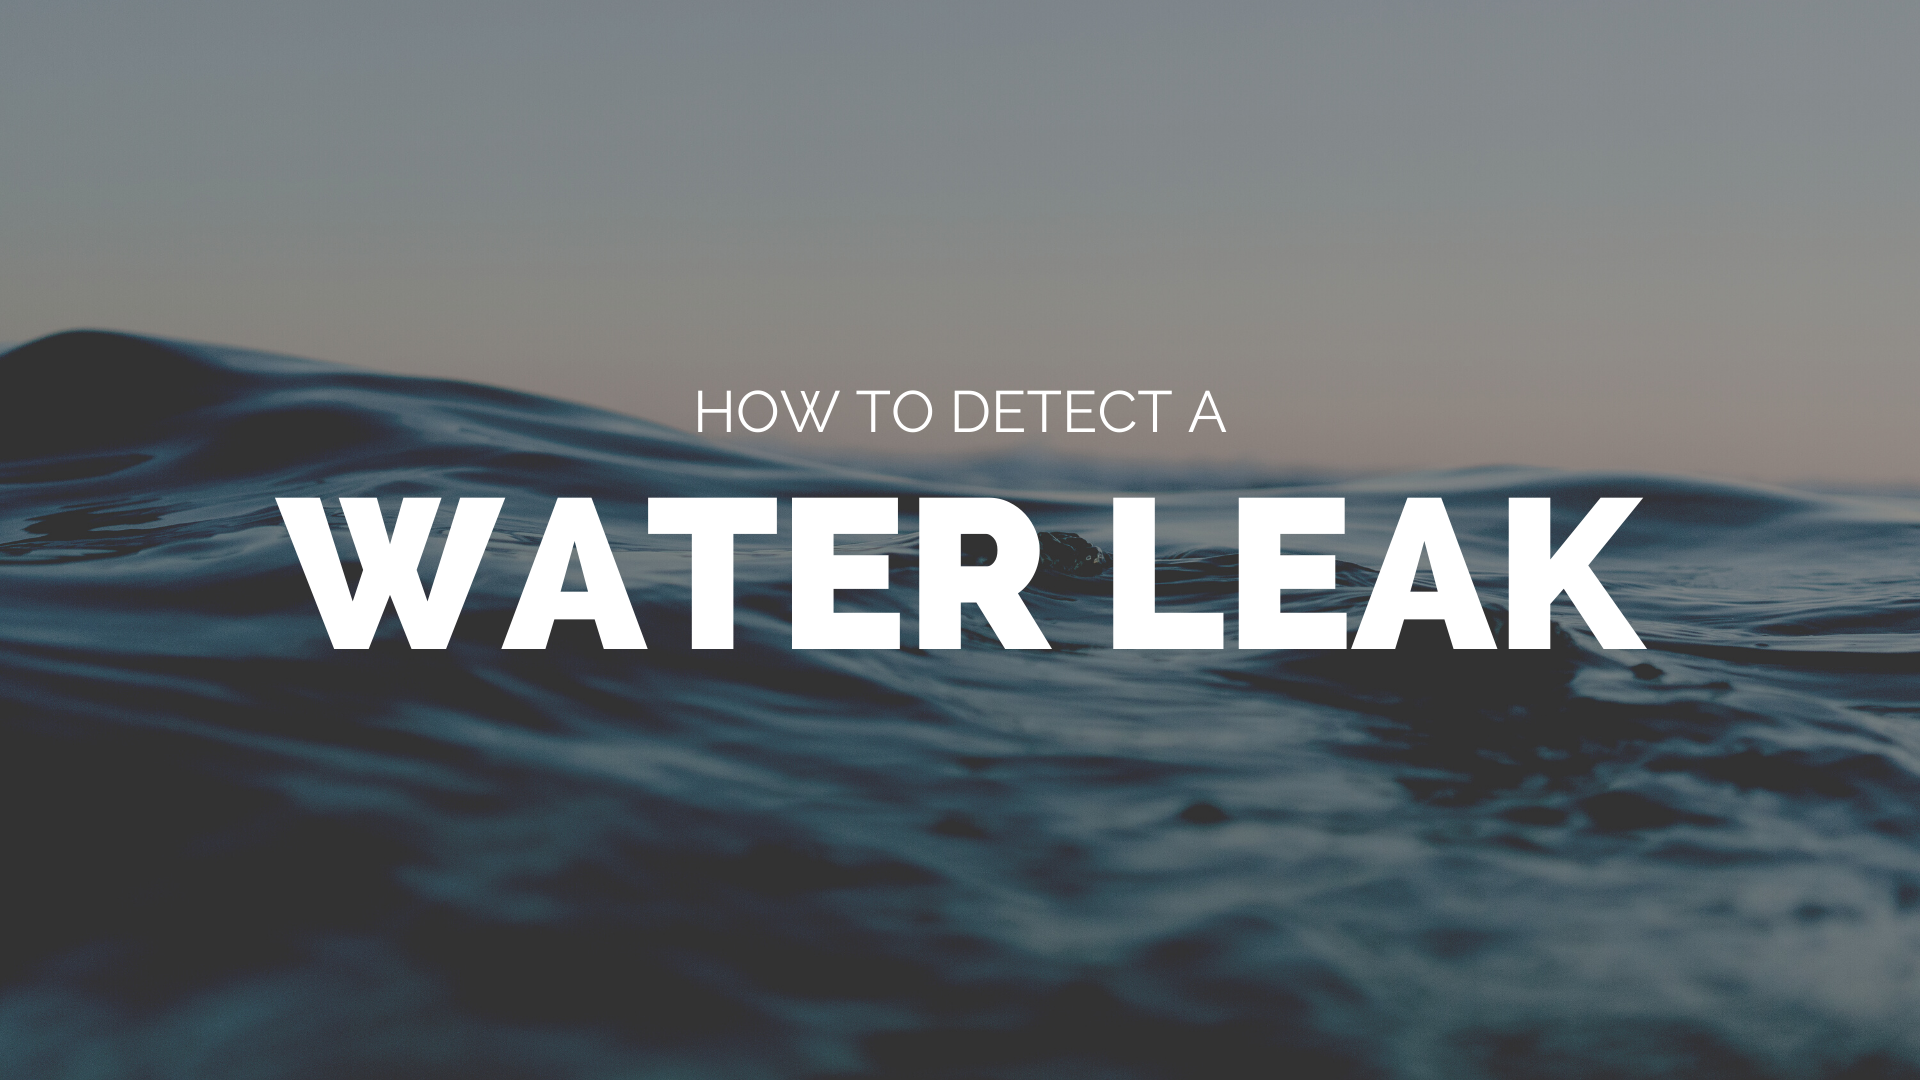 How to Detect a Water Leak